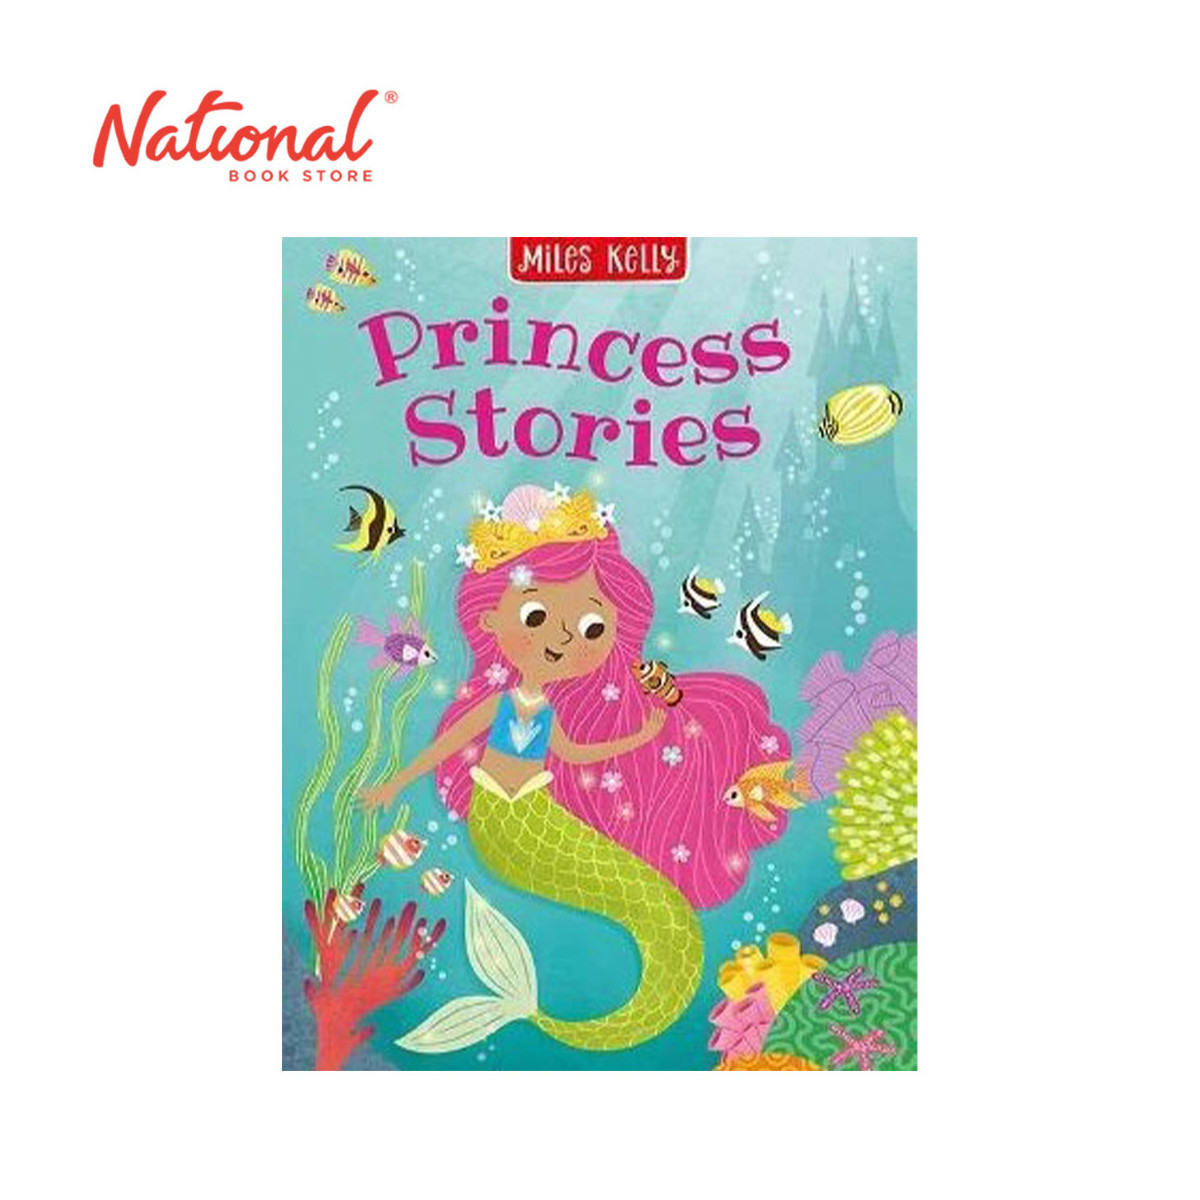 Princess Stories - Hardcover - Storybooks for Kids